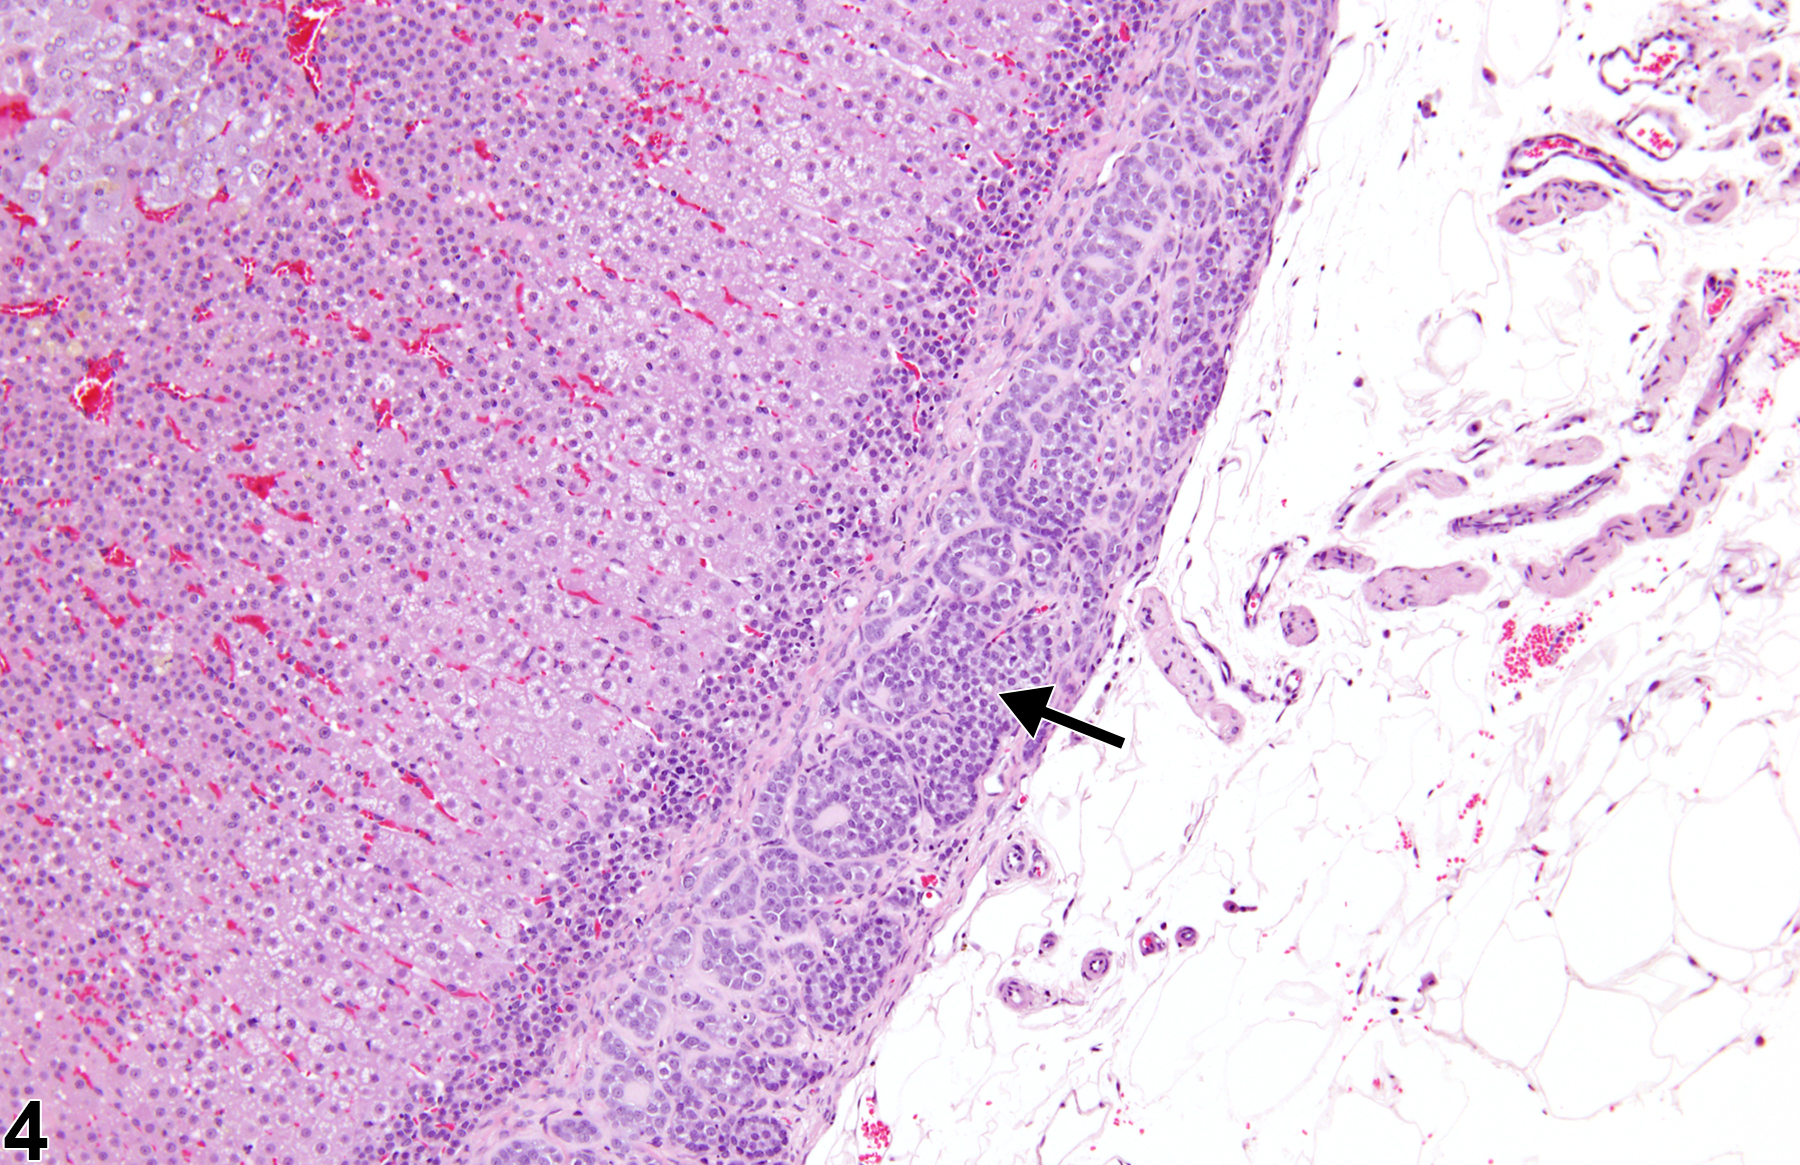 Image of accessory adrenocortical nodule in the adrenal gland from a male F344/N rat in a chronic study